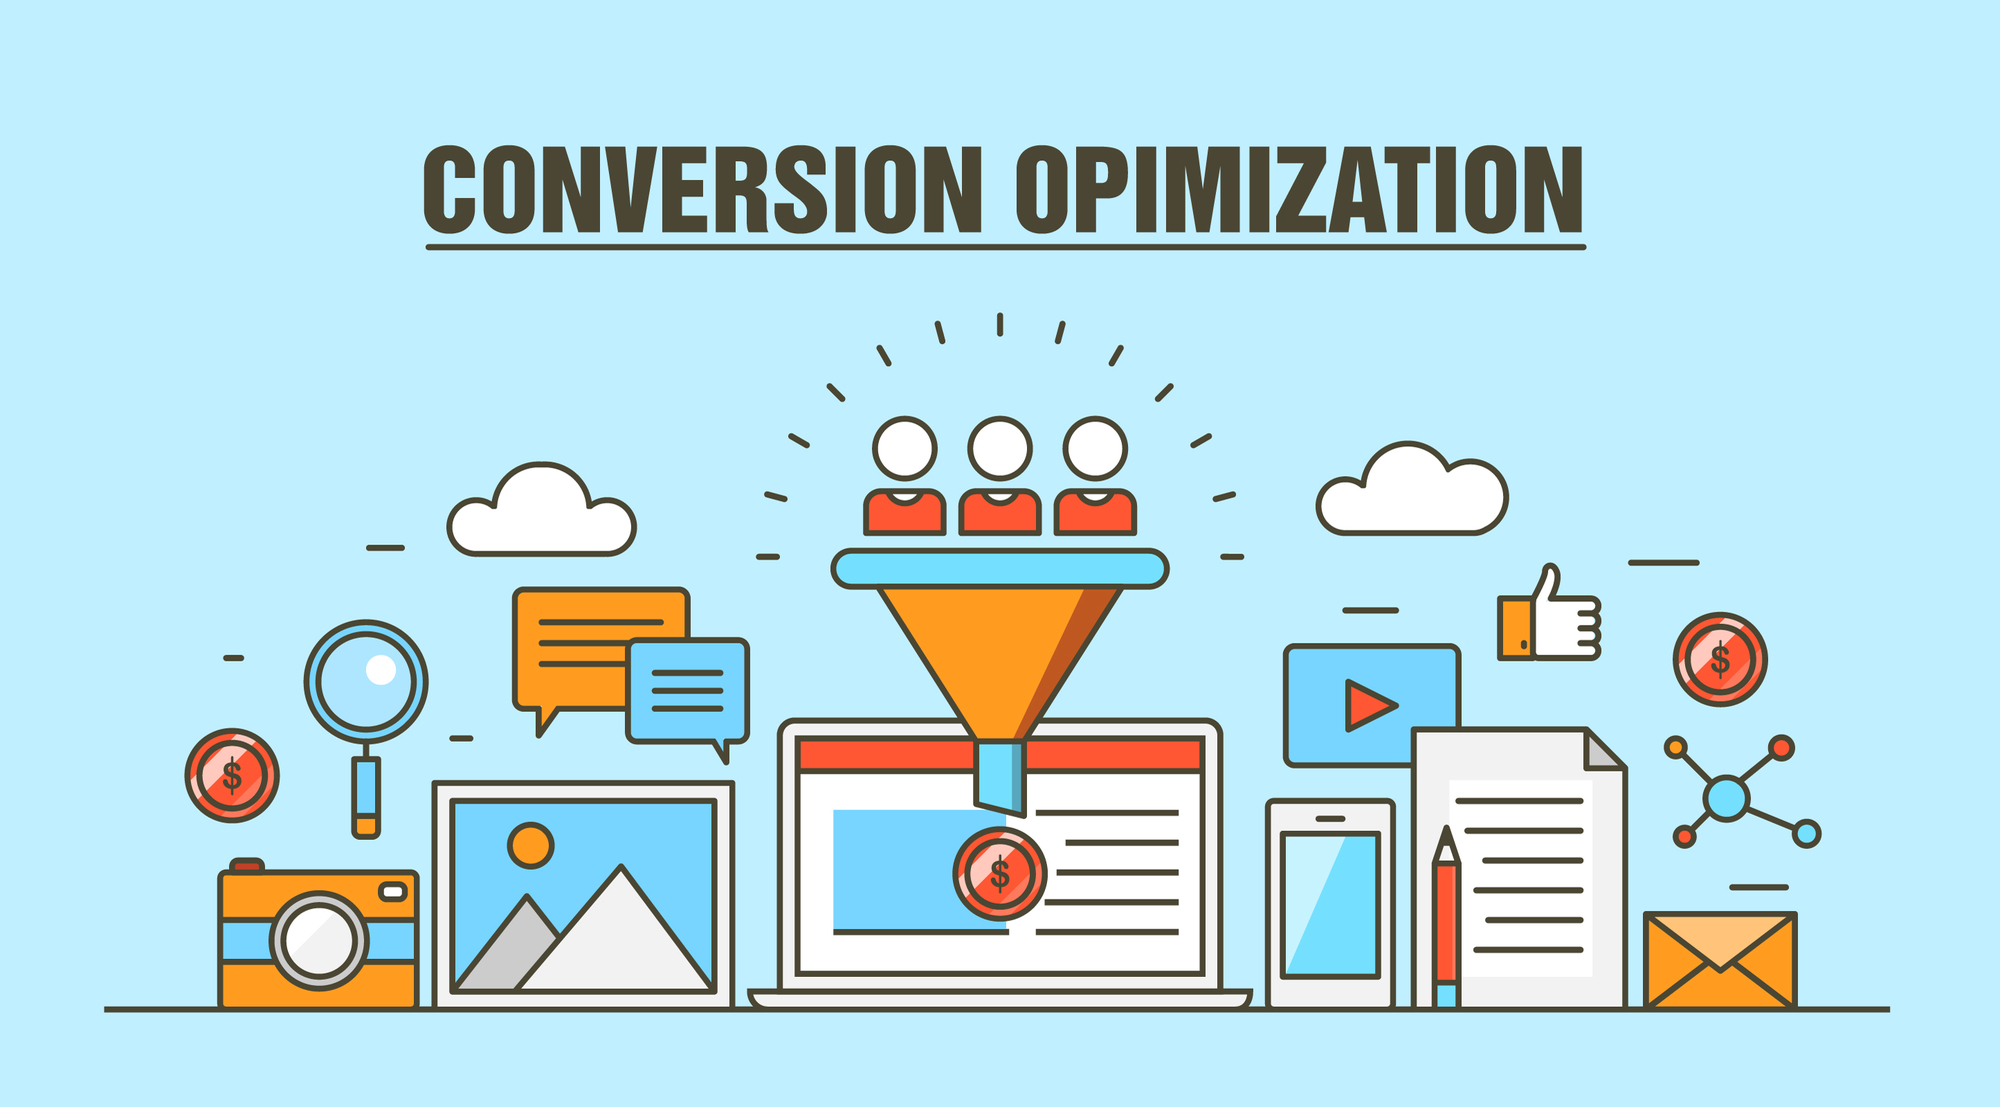 20 Ways to Increase Conversion Rate for More Leads, Sales and ROI On Your Digital and Social Marketing